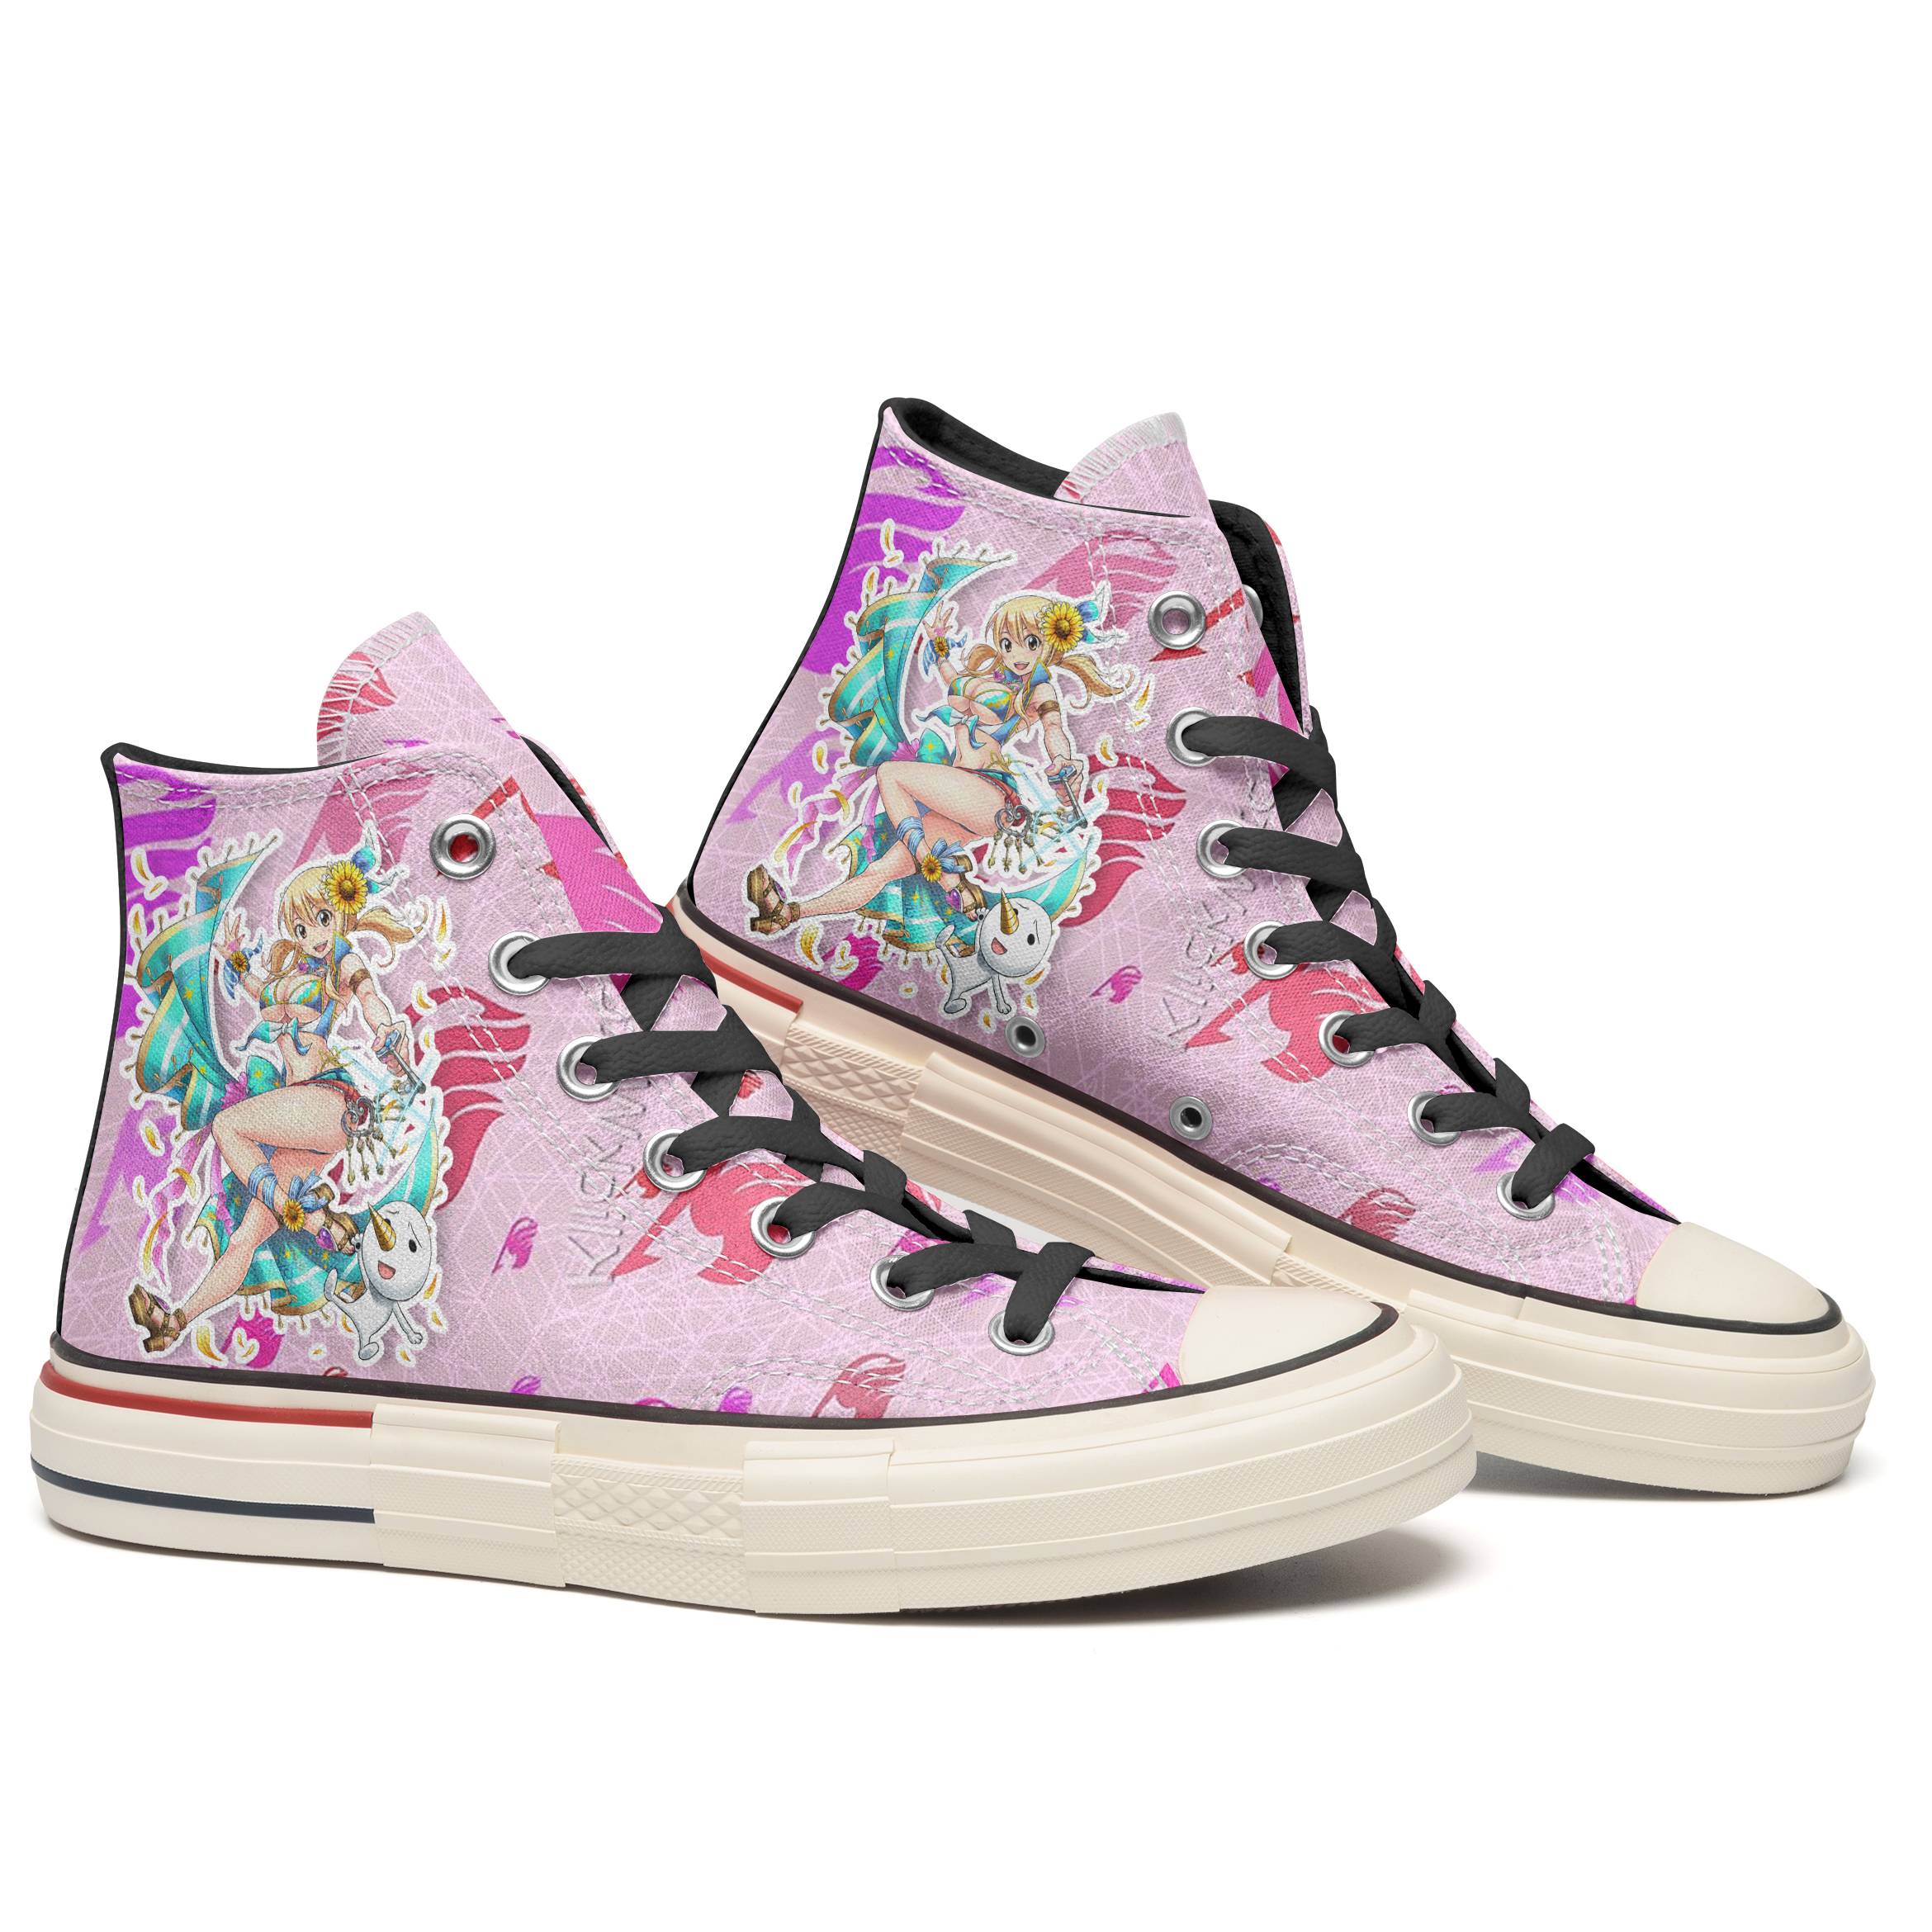 Lucy Heartfilia High Top Canvas Shoes Special Edition